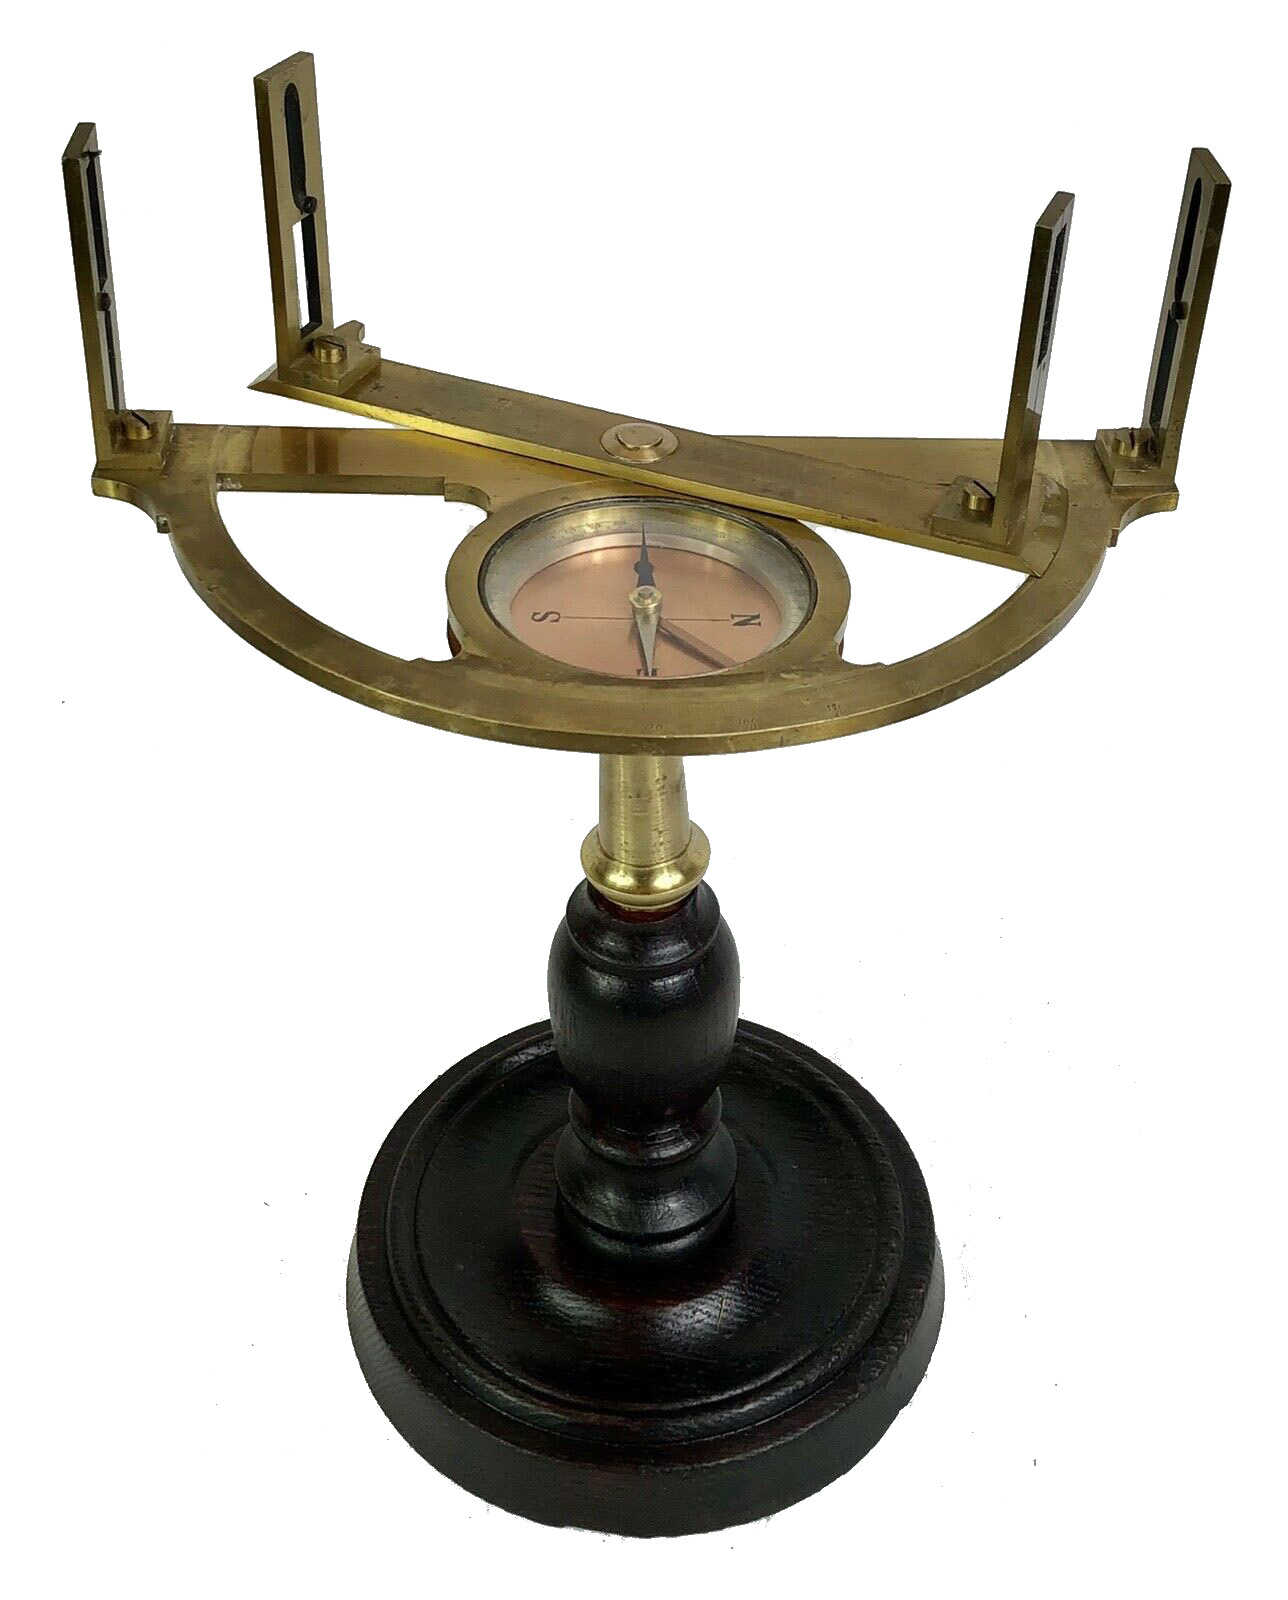 Fine late 18th century large graphometer on ebonized stand